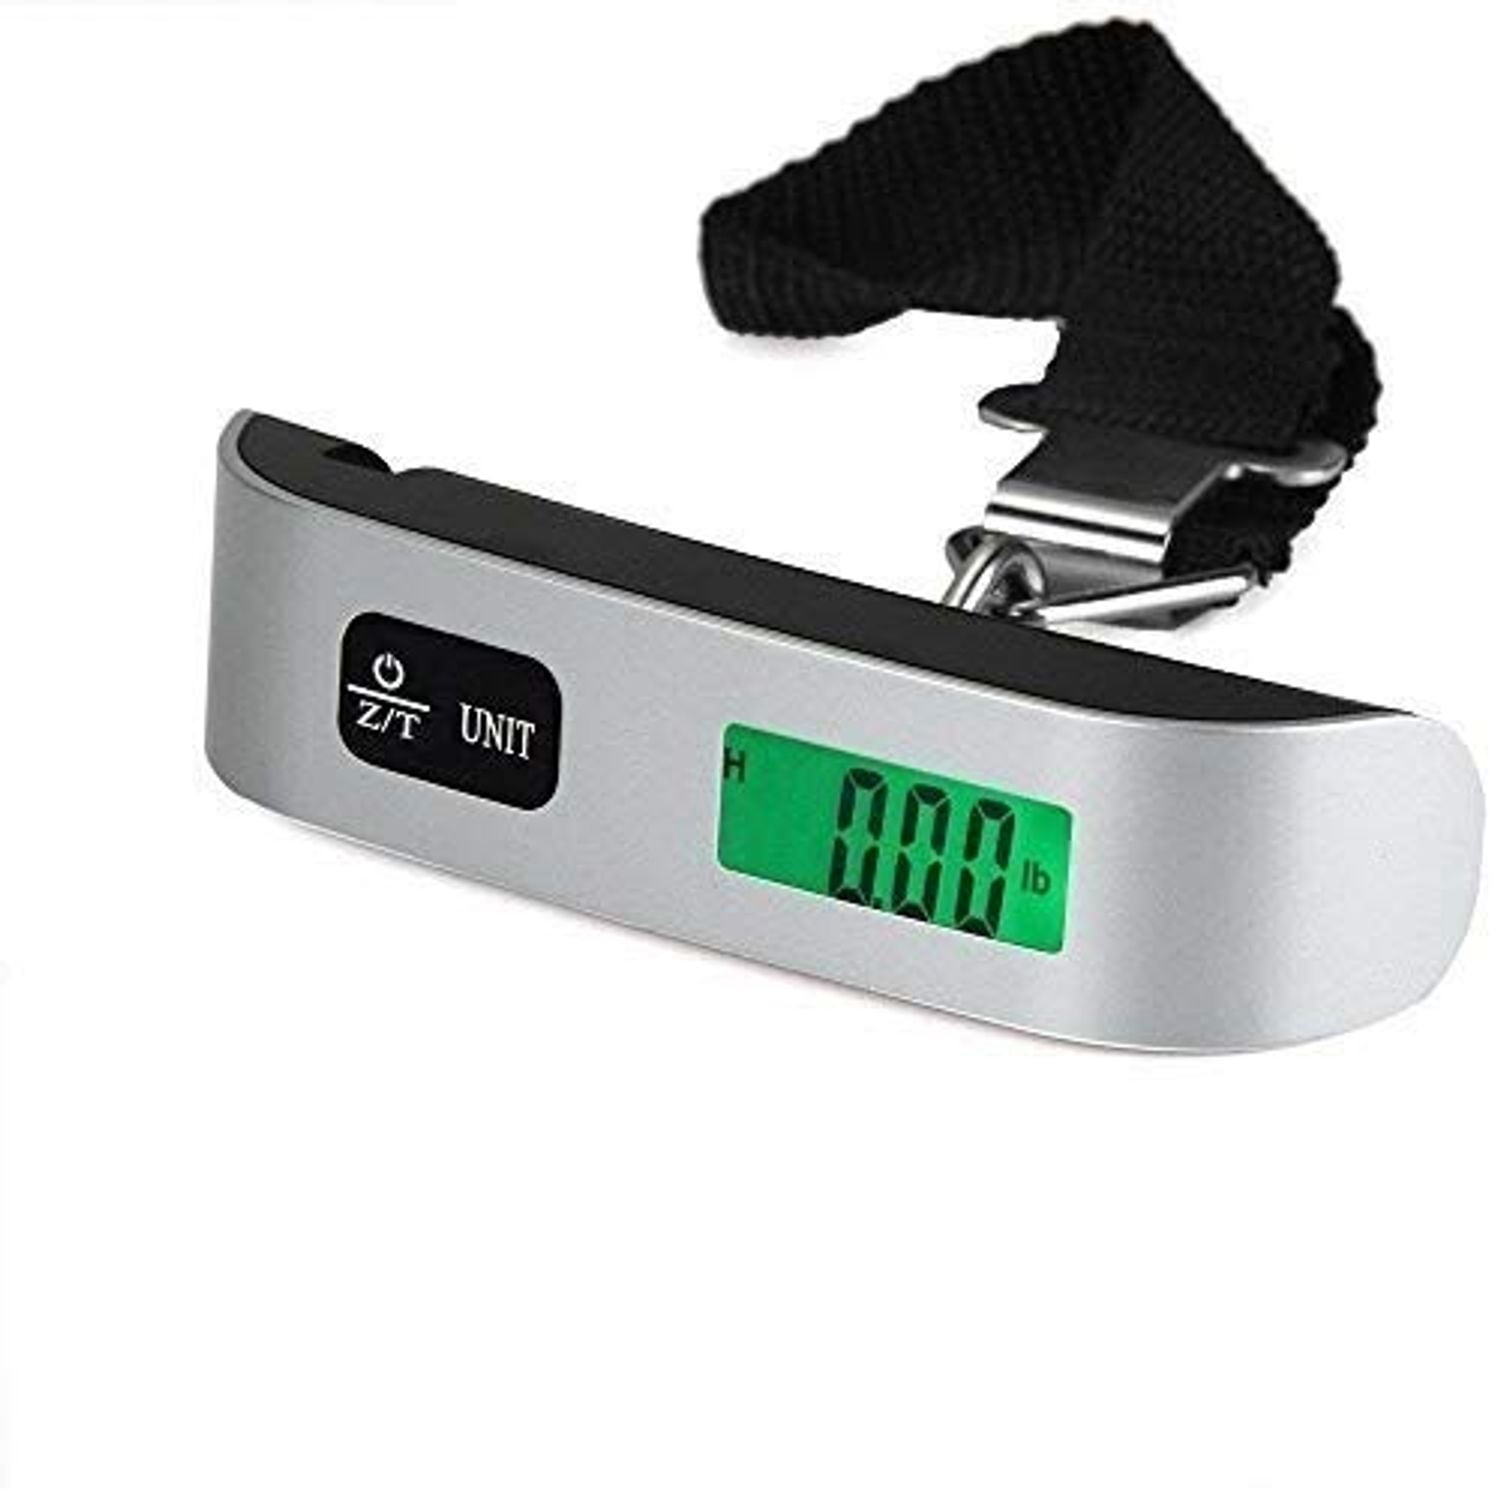 Digital Luggage Scale Hand Held Checked Airport Baggage Bag Carry On LCD 110 Lb 